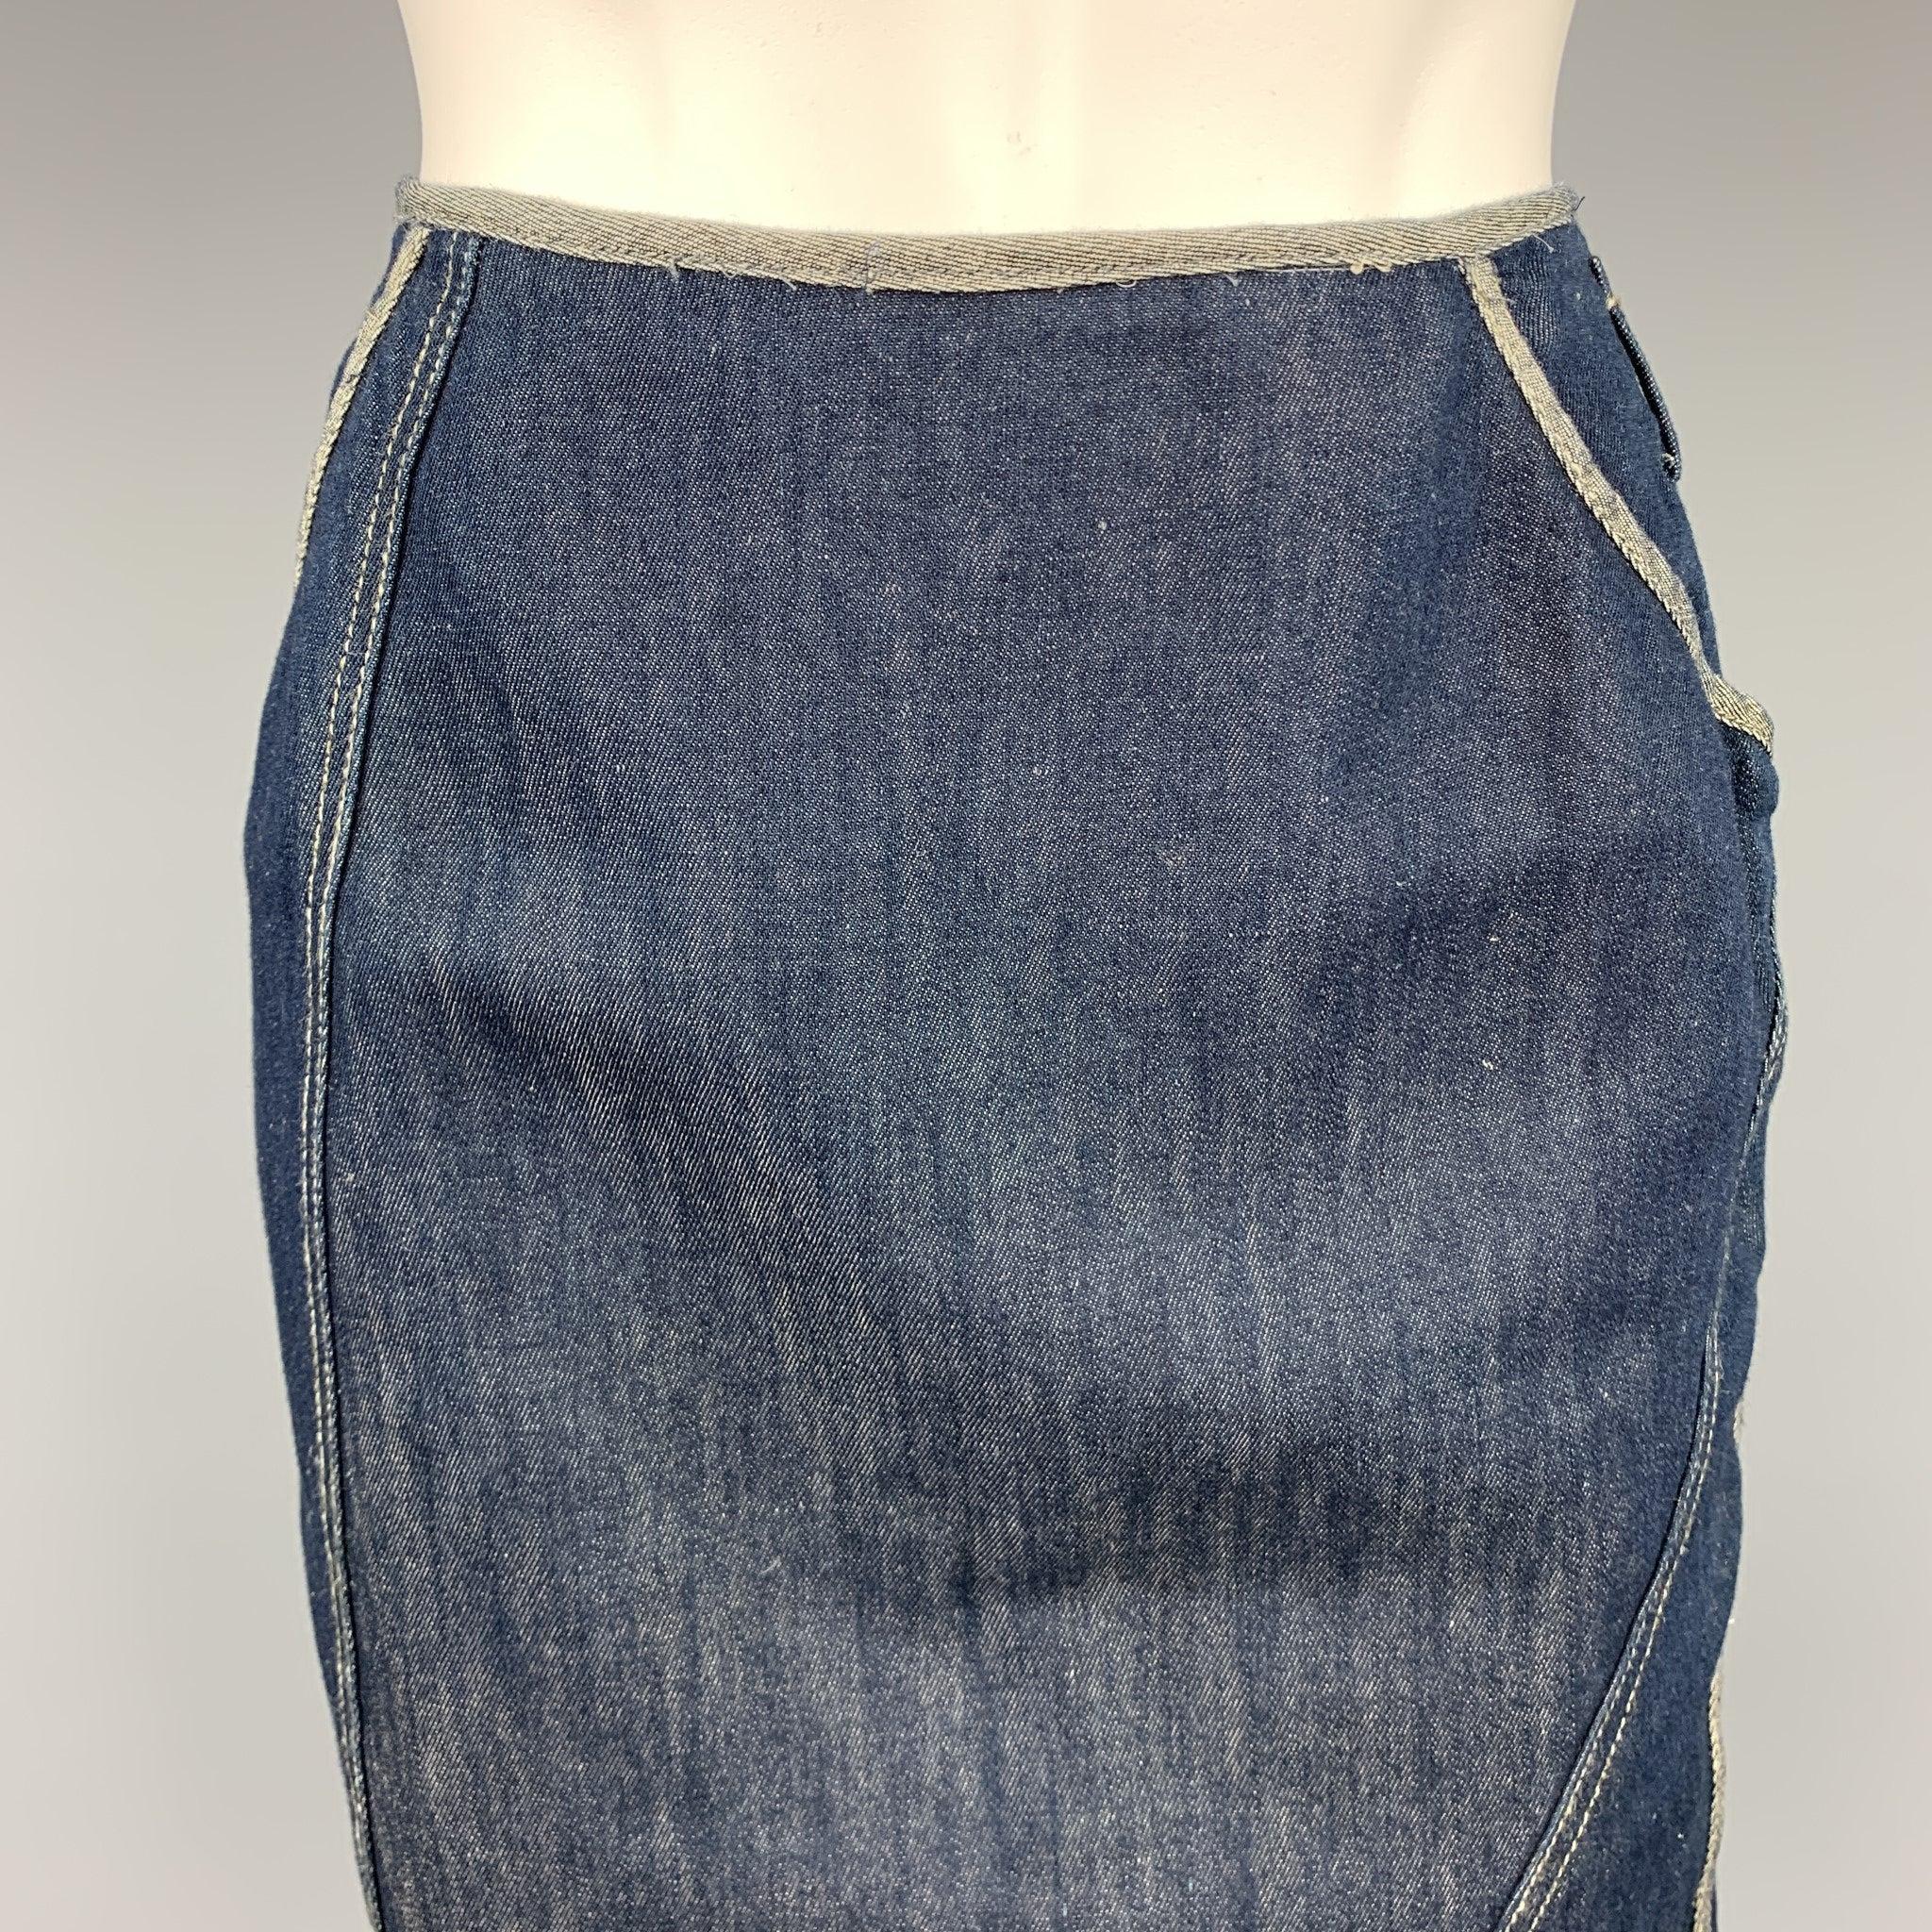 NINA RICCI skirt comes in a blue cotton / flax with a full liner featuring a pencil style, pockets, and a sid zip up closure. Made in Italy.Very Good
Pre-Owned Condition. 

Marked:   36 

Measurements: 
  Waist: 28 inches 
Hip: 34 inches 
Length: 20